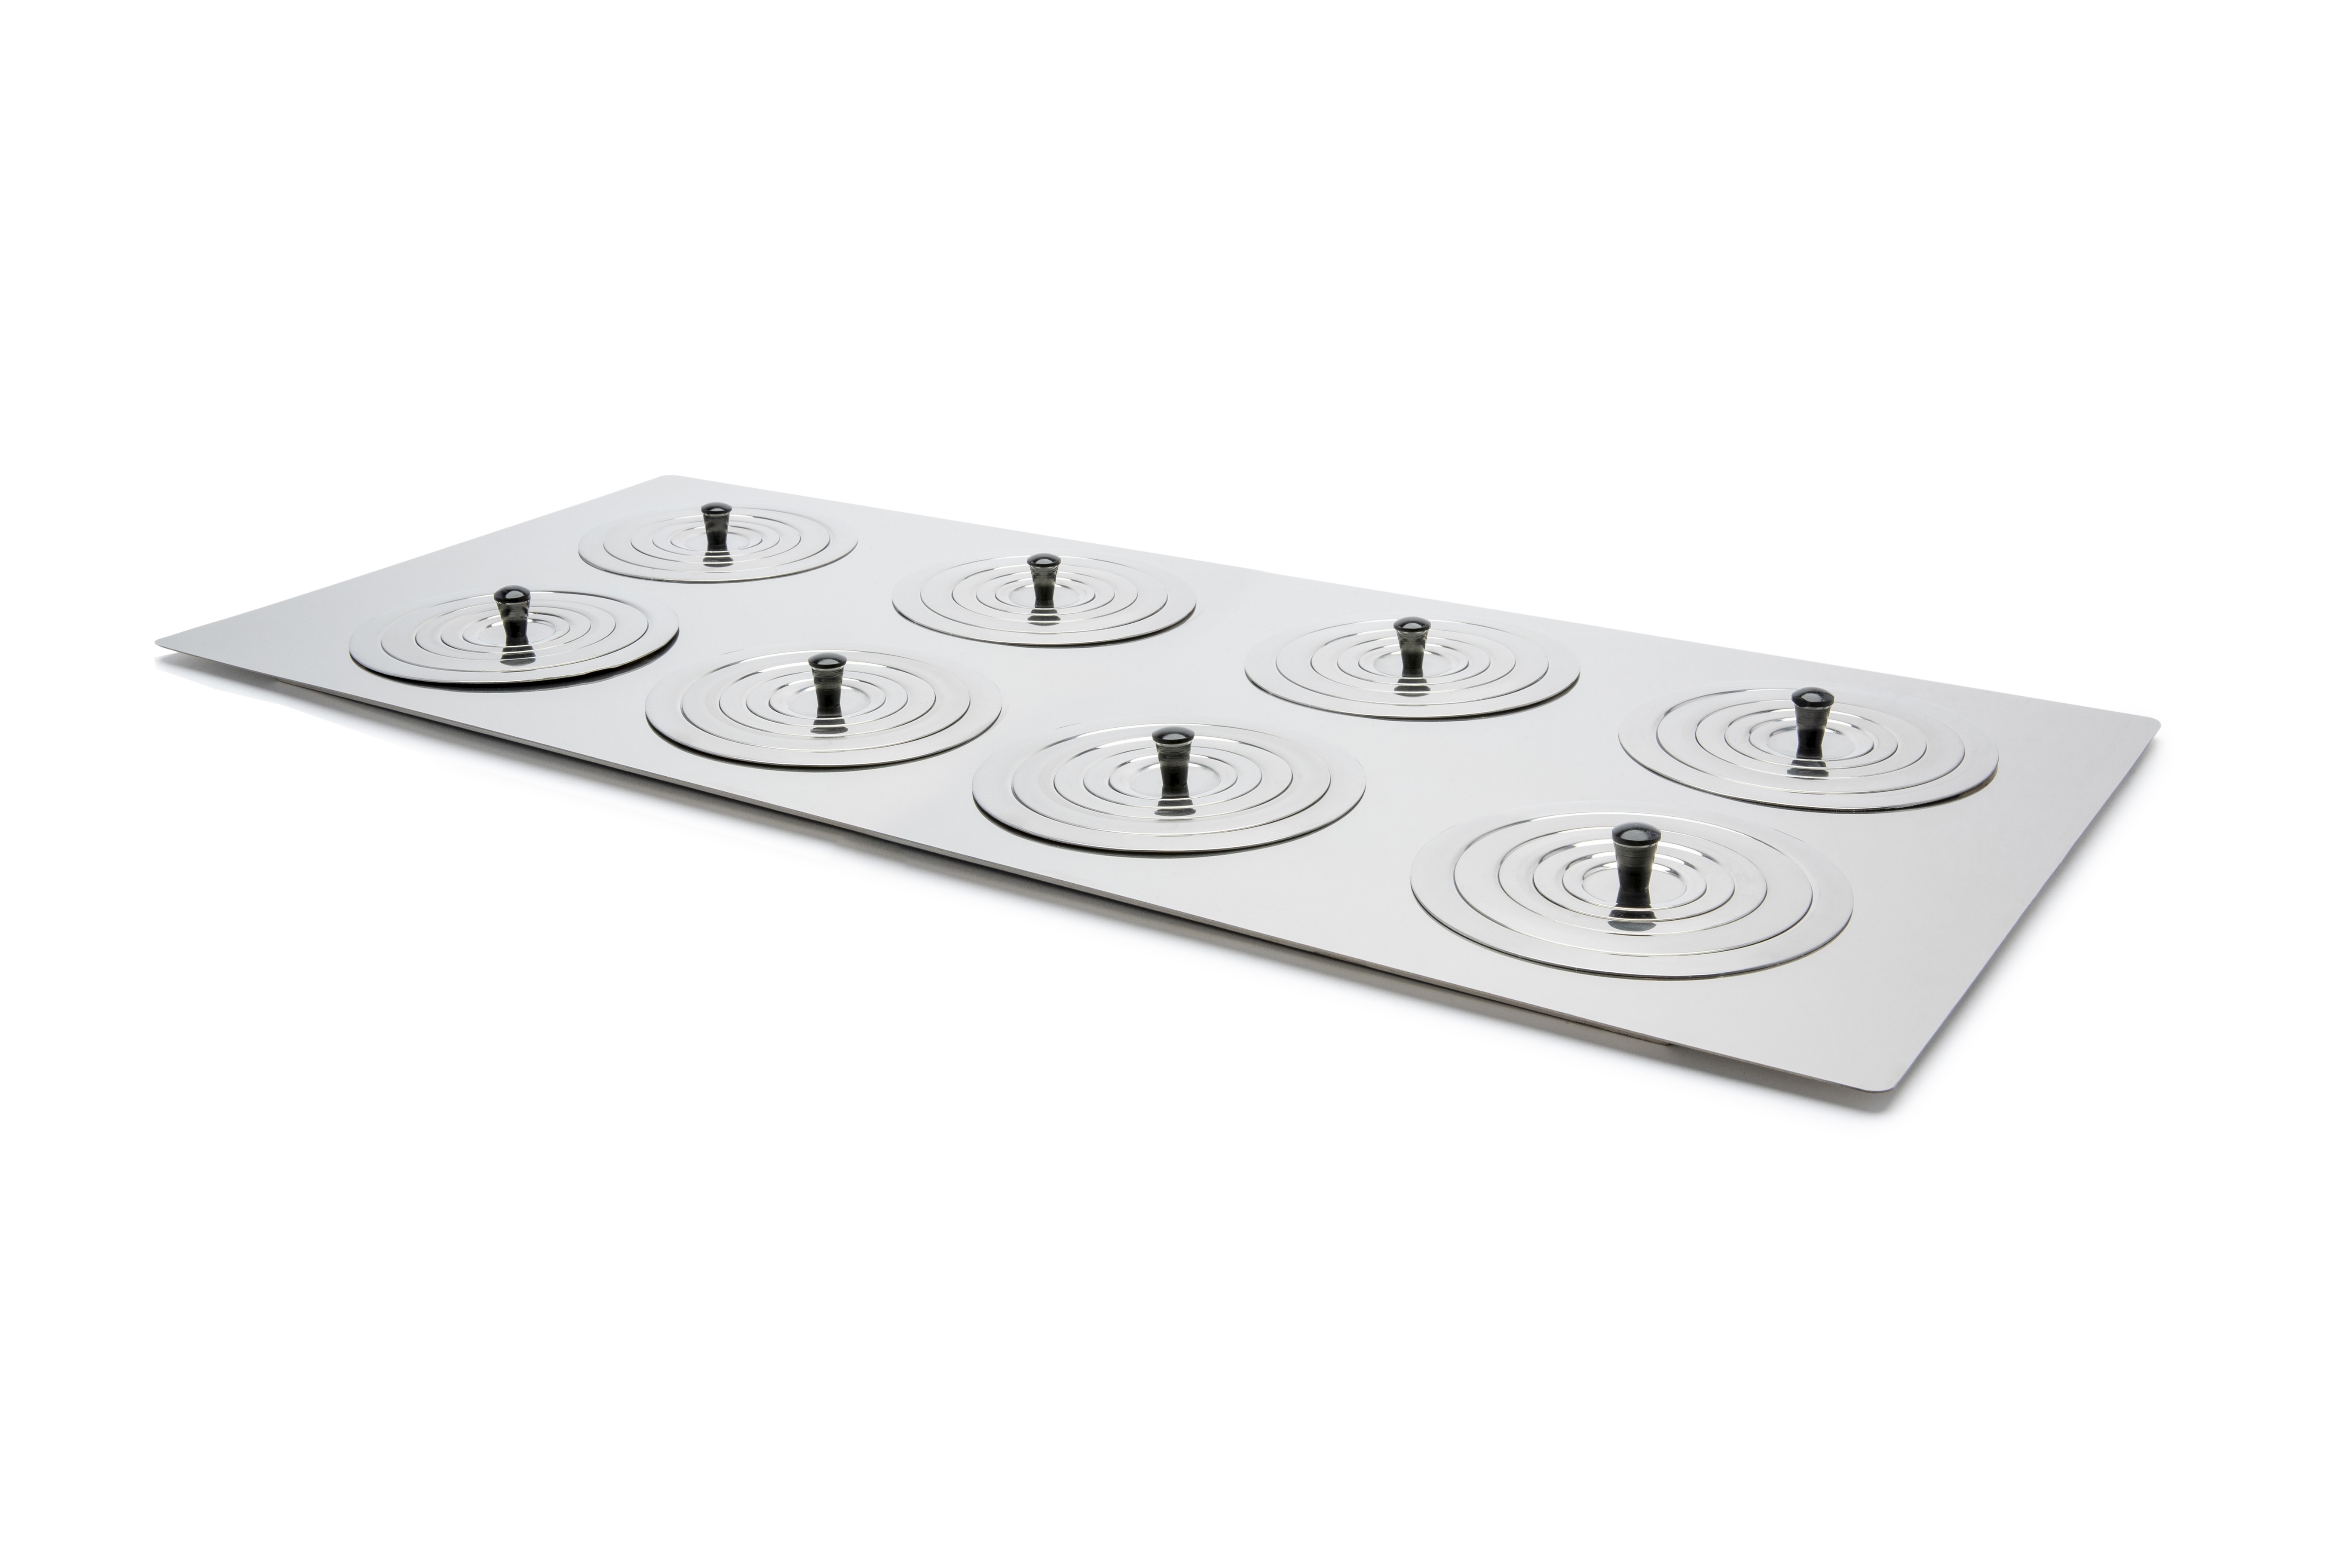 LF36 - Grant Instruments Stainless Steel Flat Lid With Ring Sets For Unstirred Water Baths